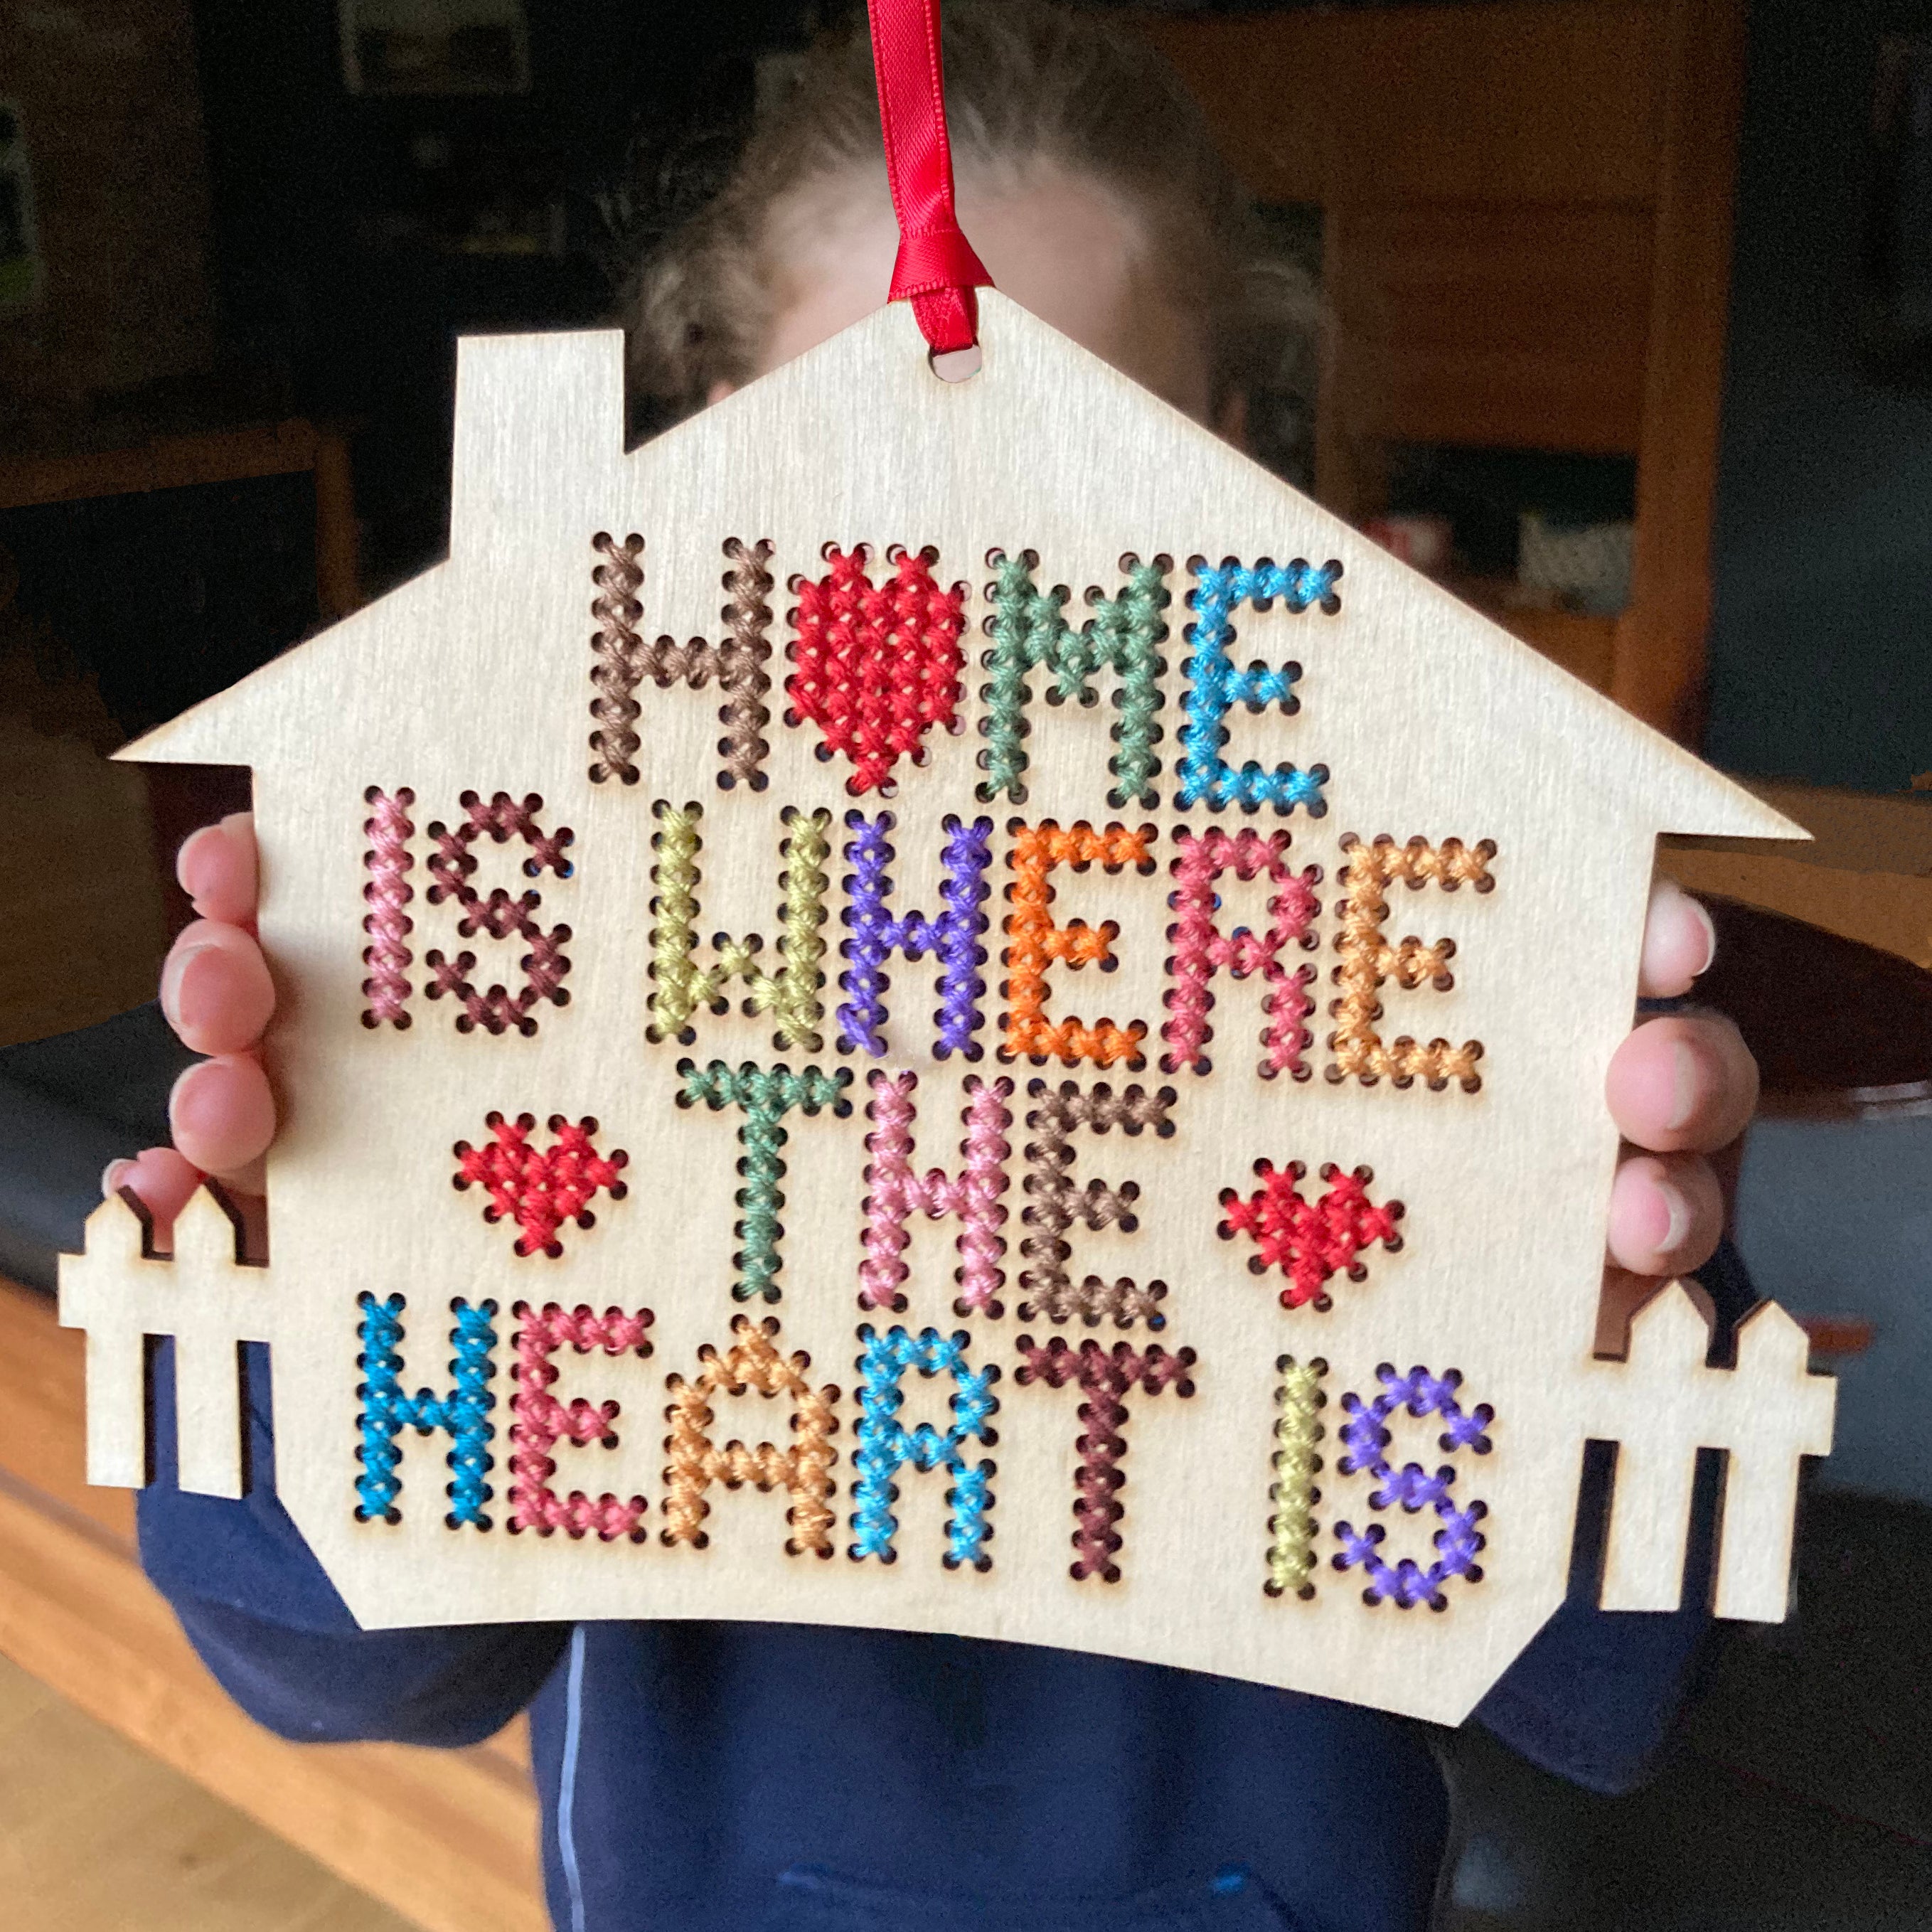 Home Is Where The Heart Is - Cross Stitch Embroidery Kit